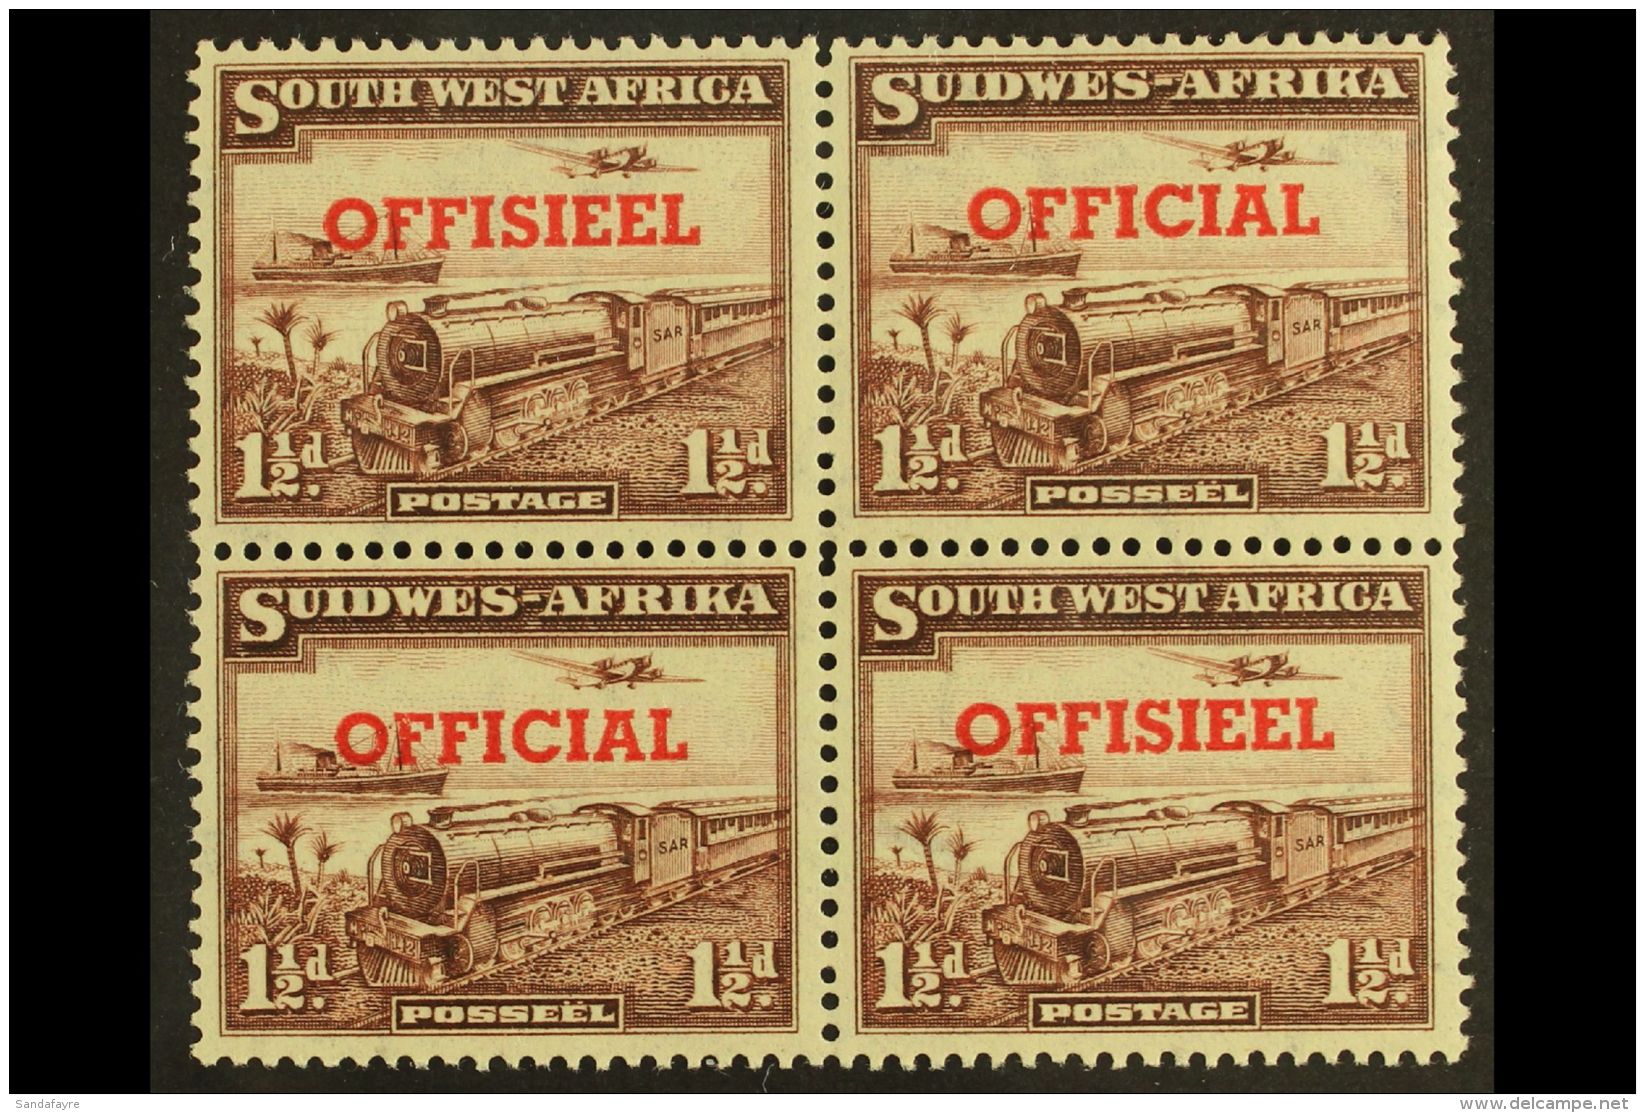 OFFICIAL 1951-2 1&frac12;d TRANSPOSED OVERPRINTS In A Block Of Four, SG O25a, Top Pair Lightly Hinged, Lower Pair... - South West Africa (1923-1990)